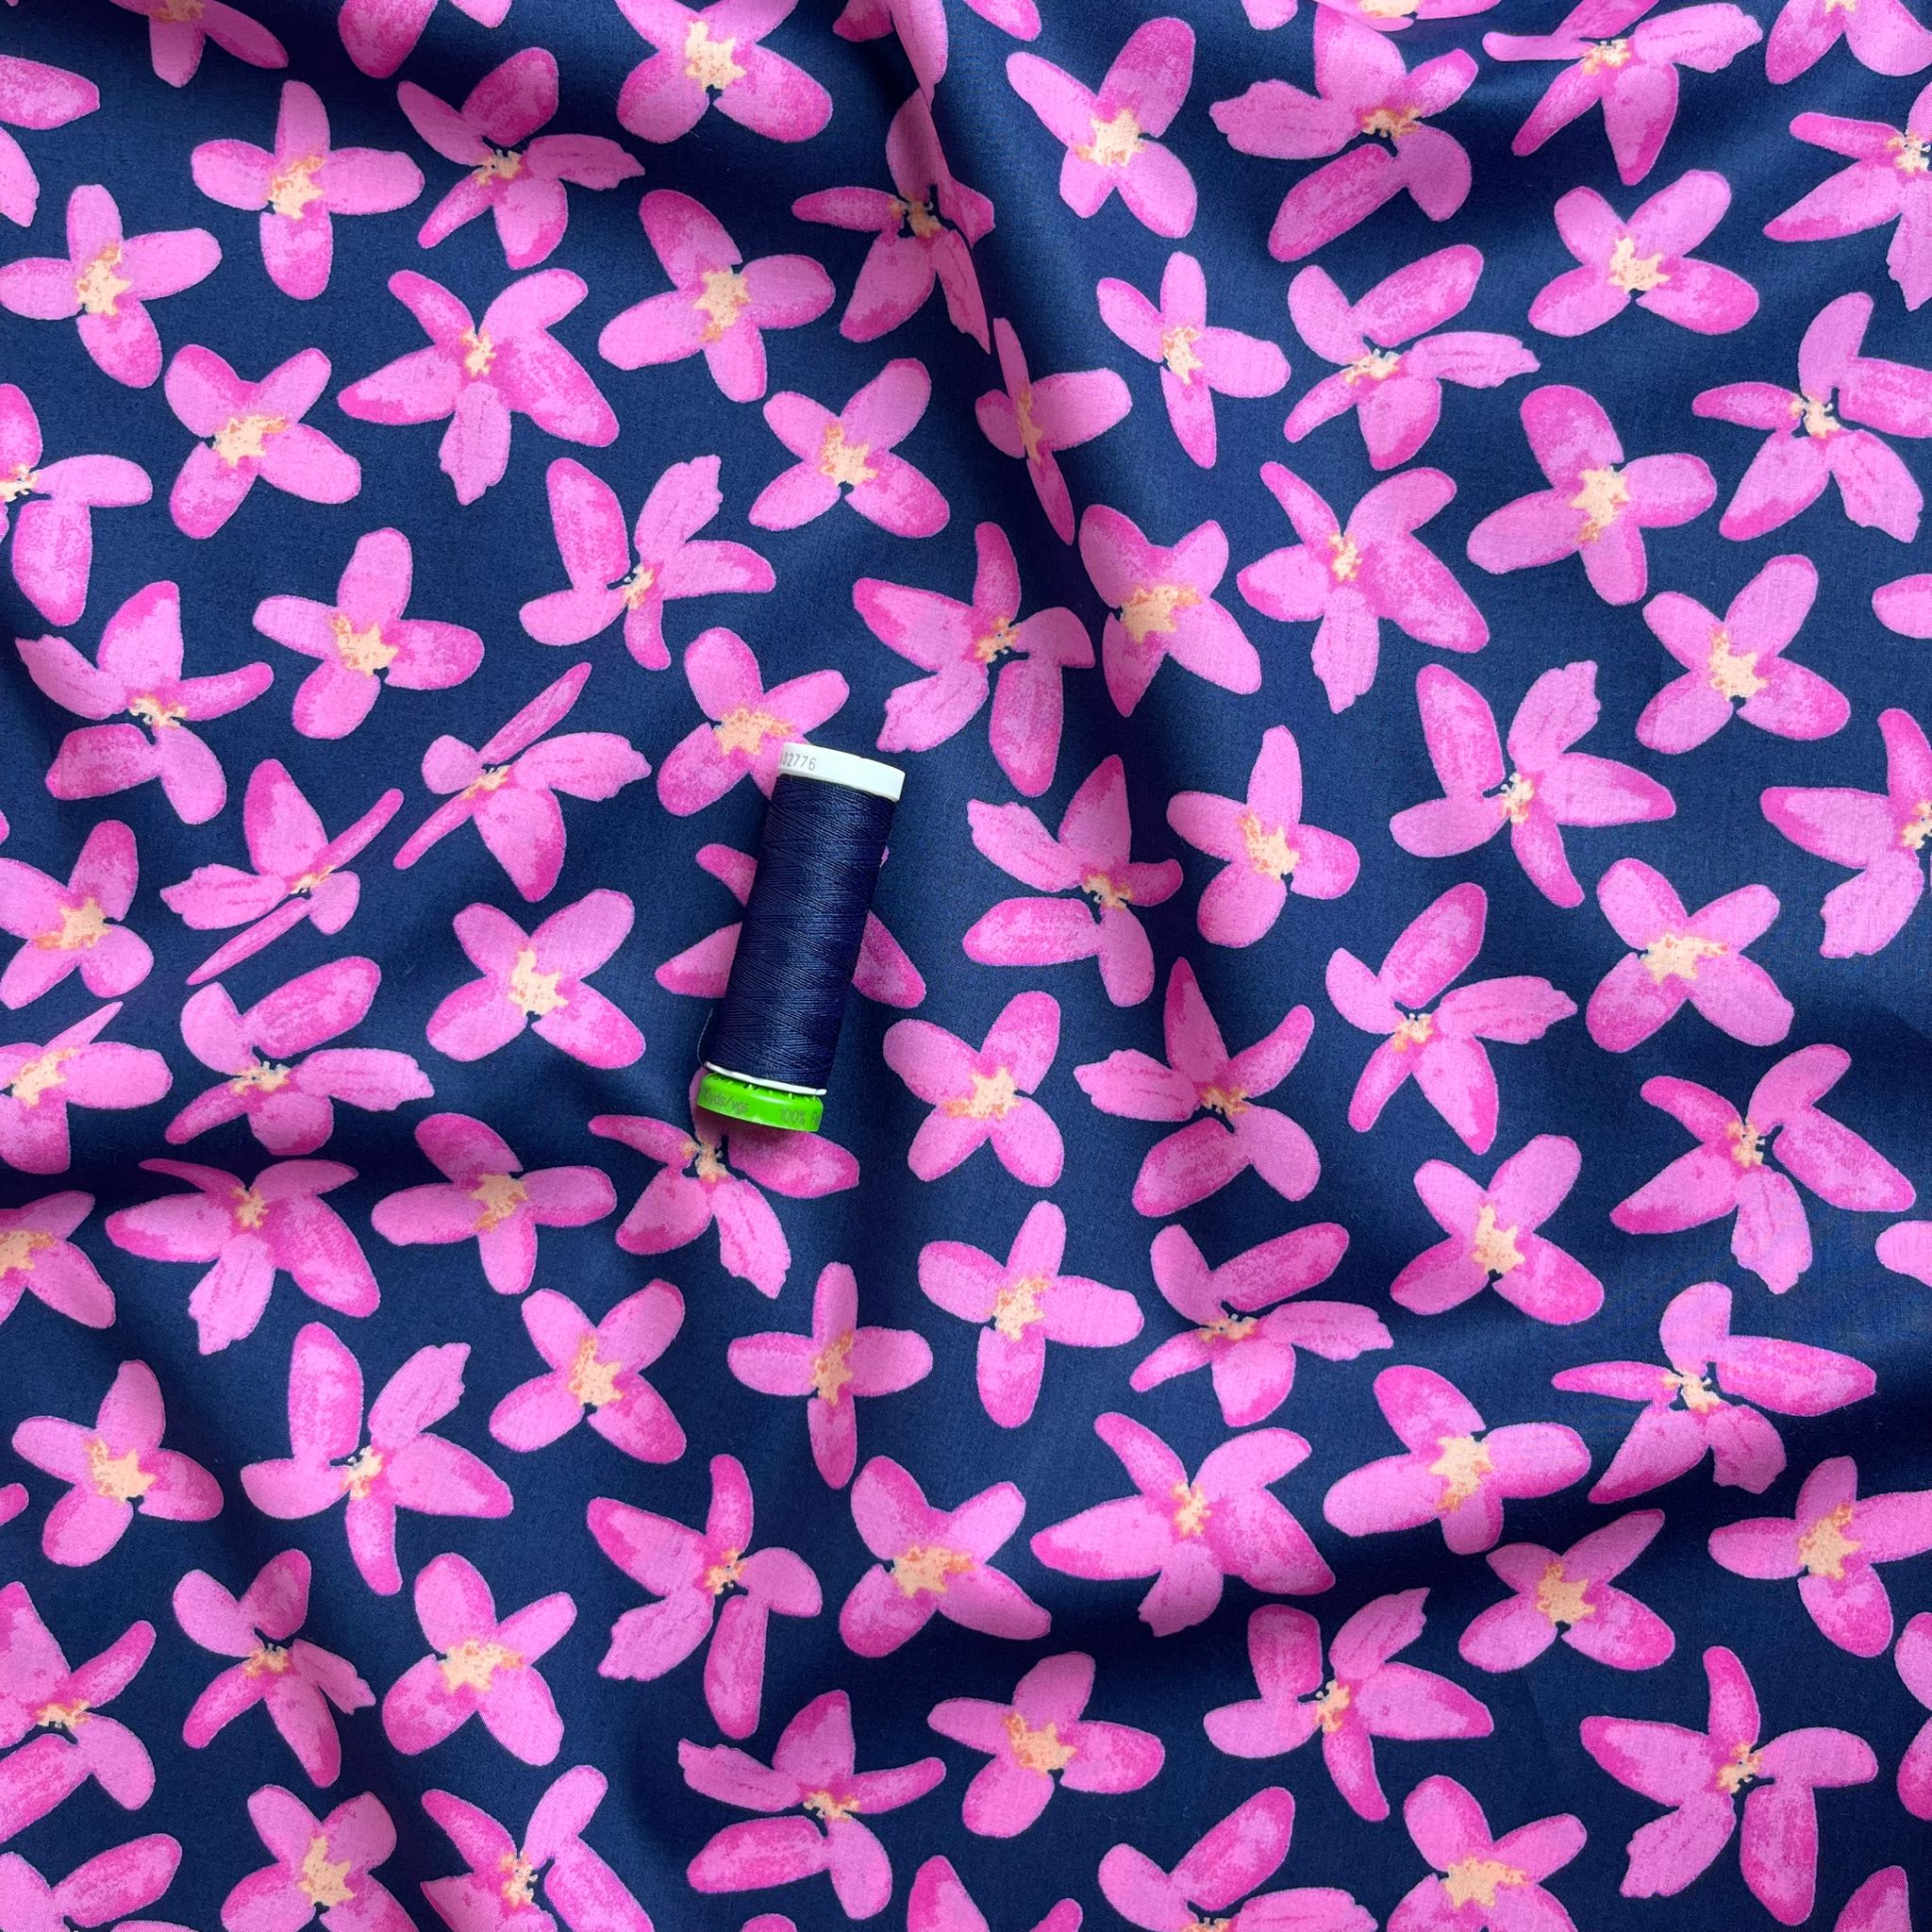 Painted Pink Flowers on Navy Cotton Lawn Fabric